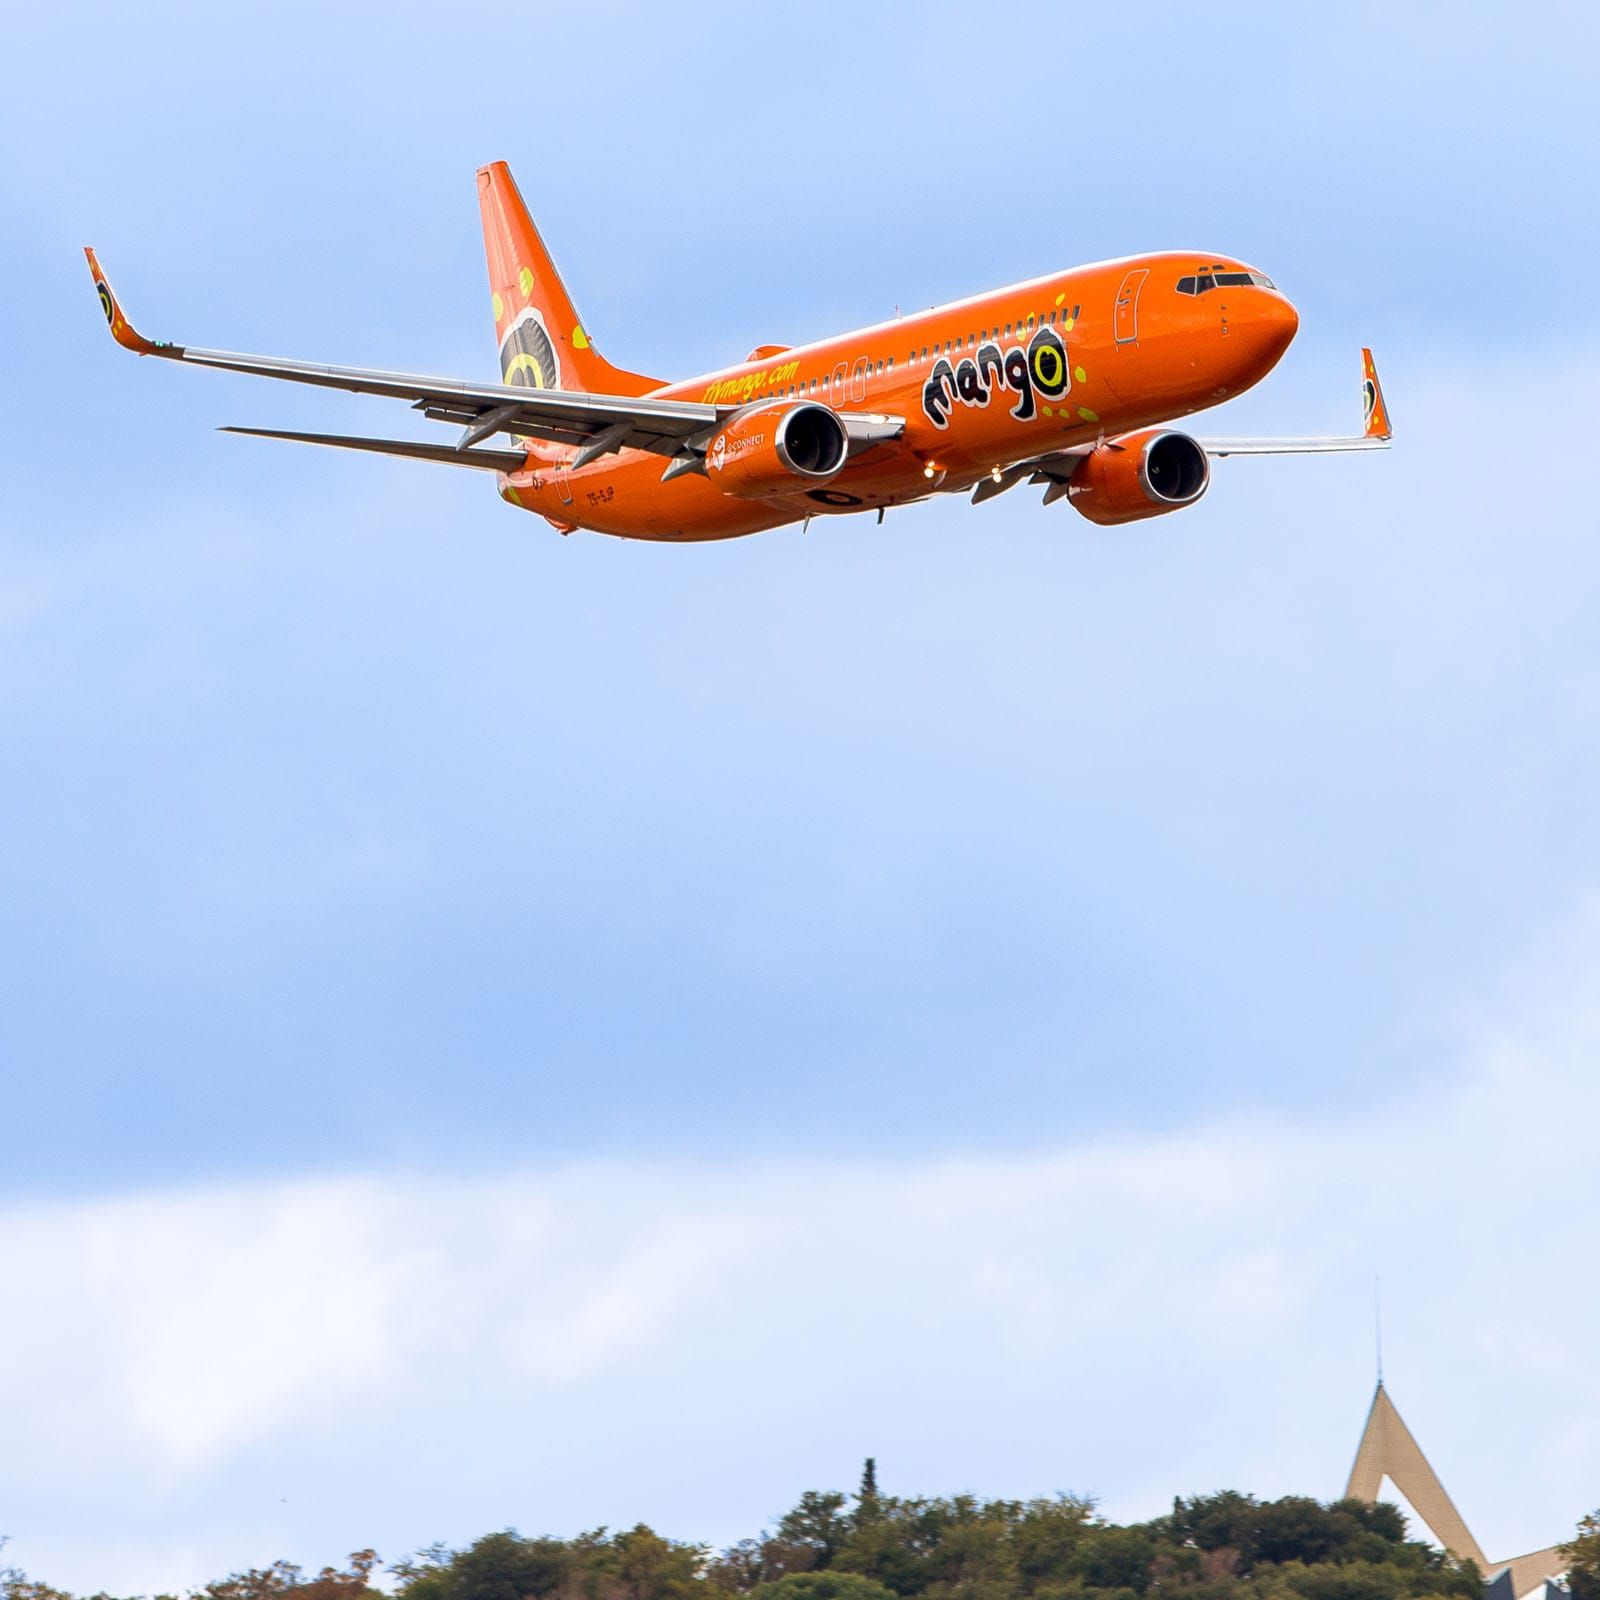 Mango airlines Boeing 737 in the sky